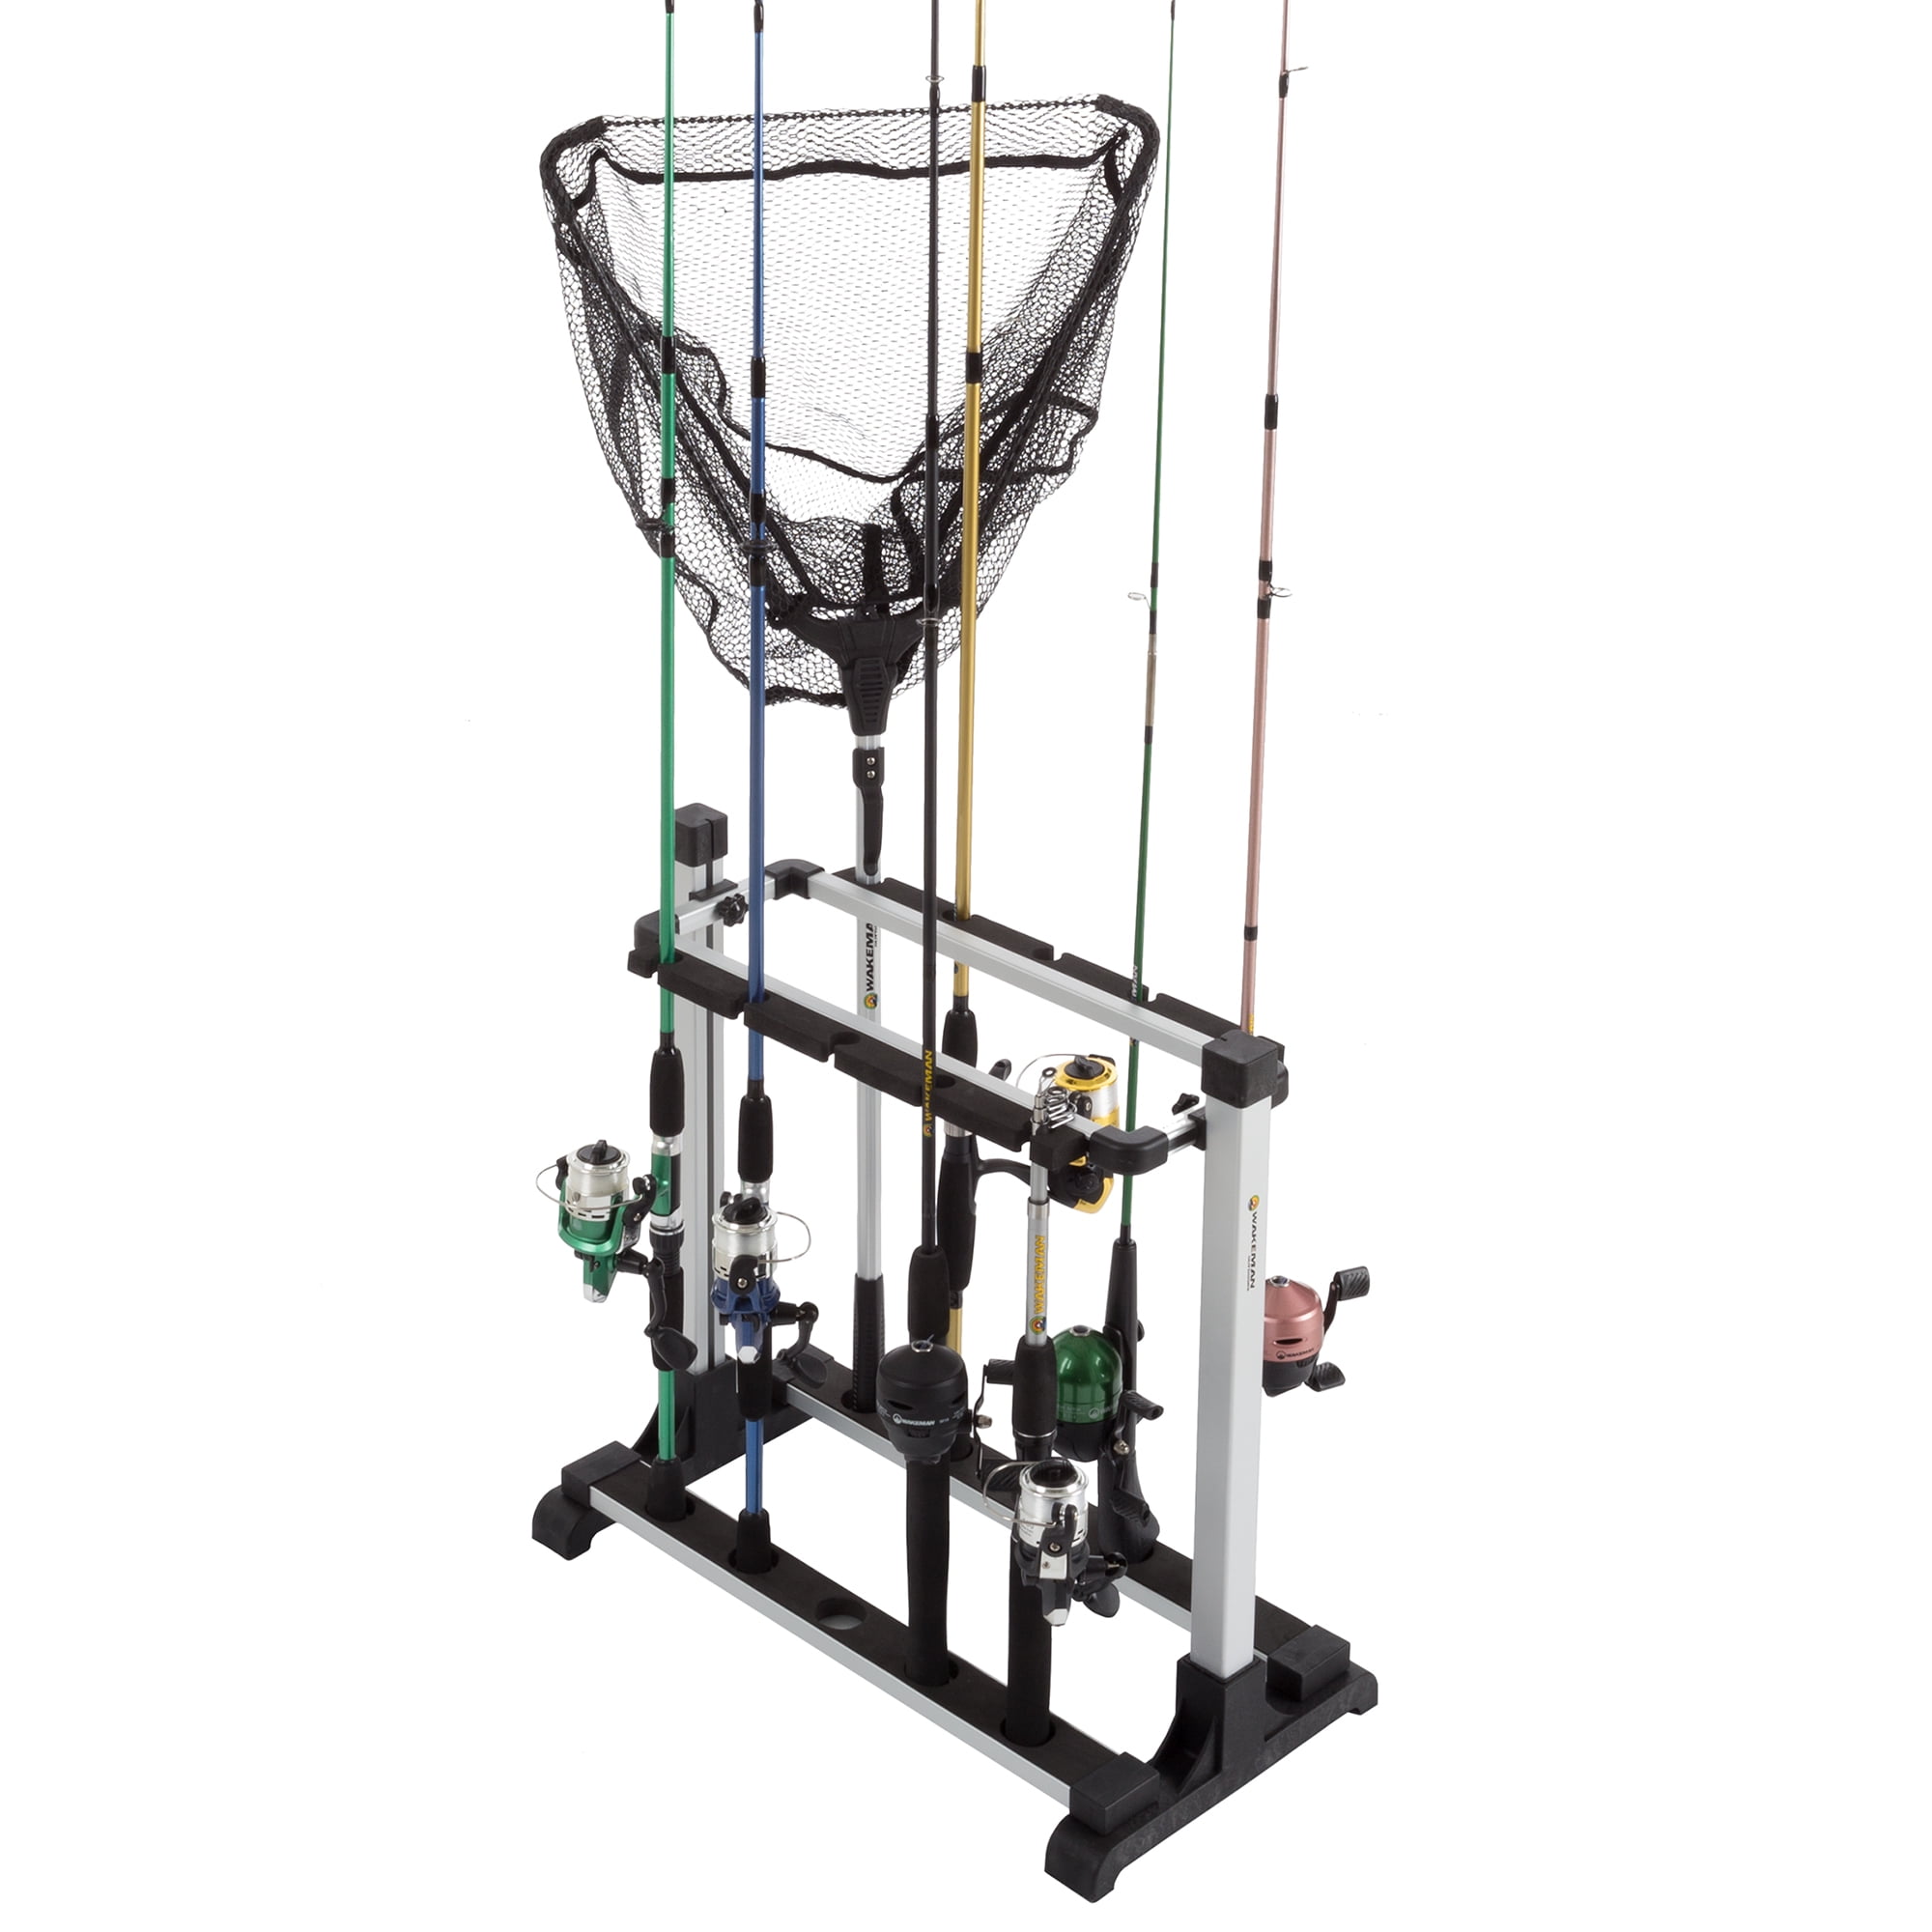 Fishing Rod Rack - 10 Rod Holder for Freshwater and Saltwater Fishing Rods